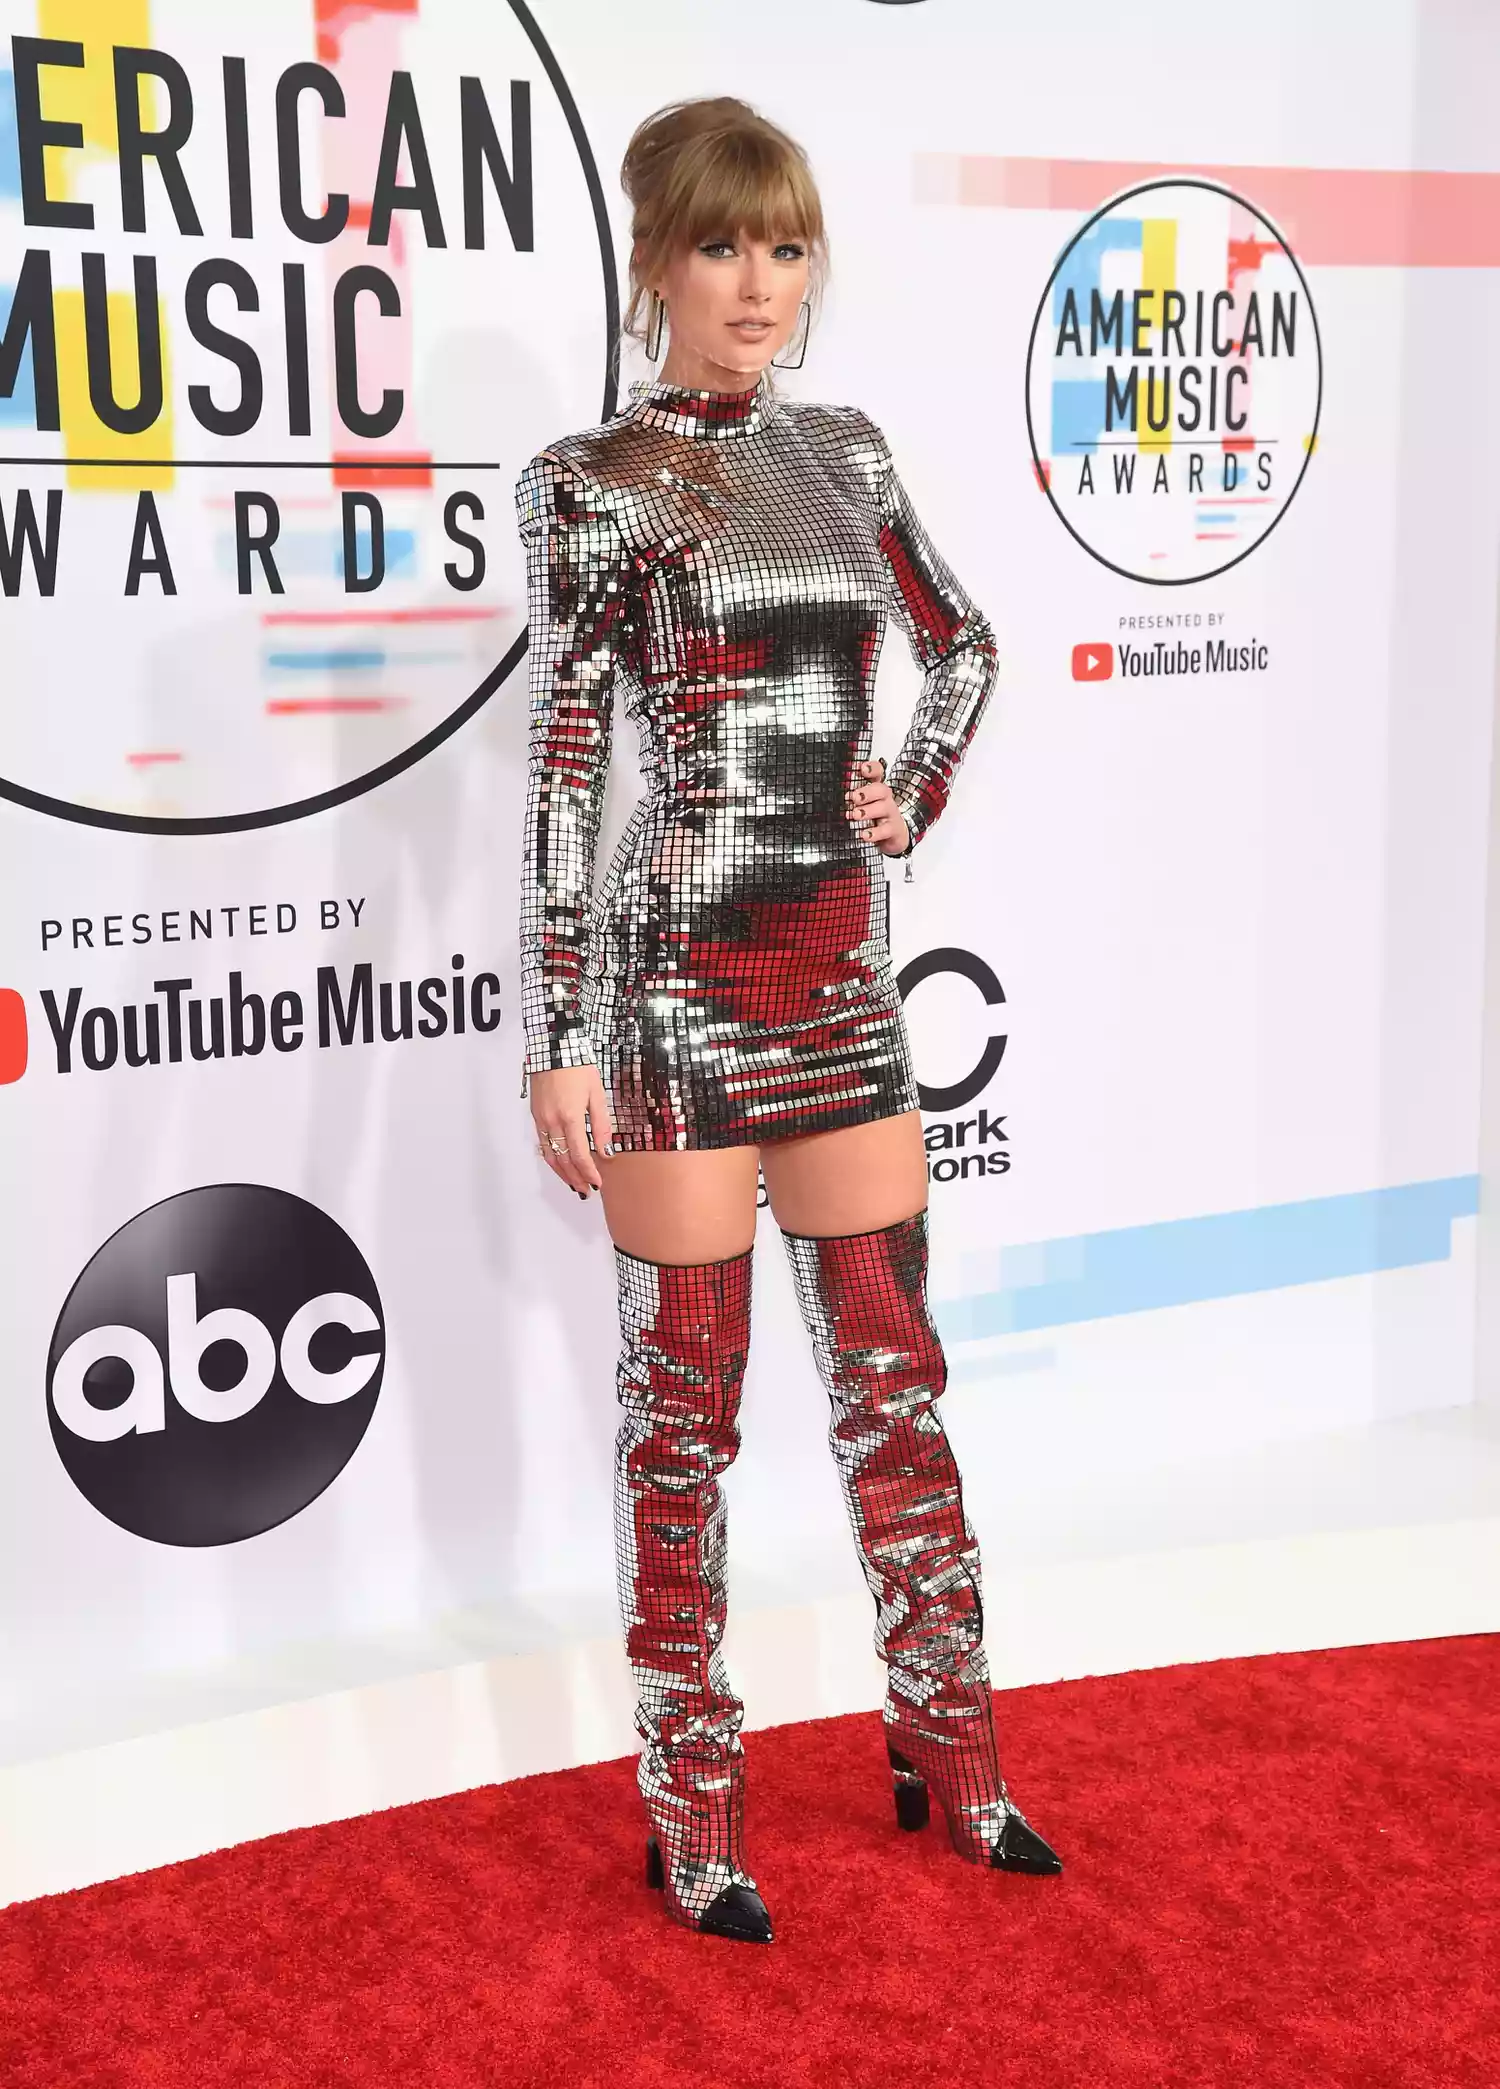 Taylor Swift on the red carpet at the 2018 American Music Awards